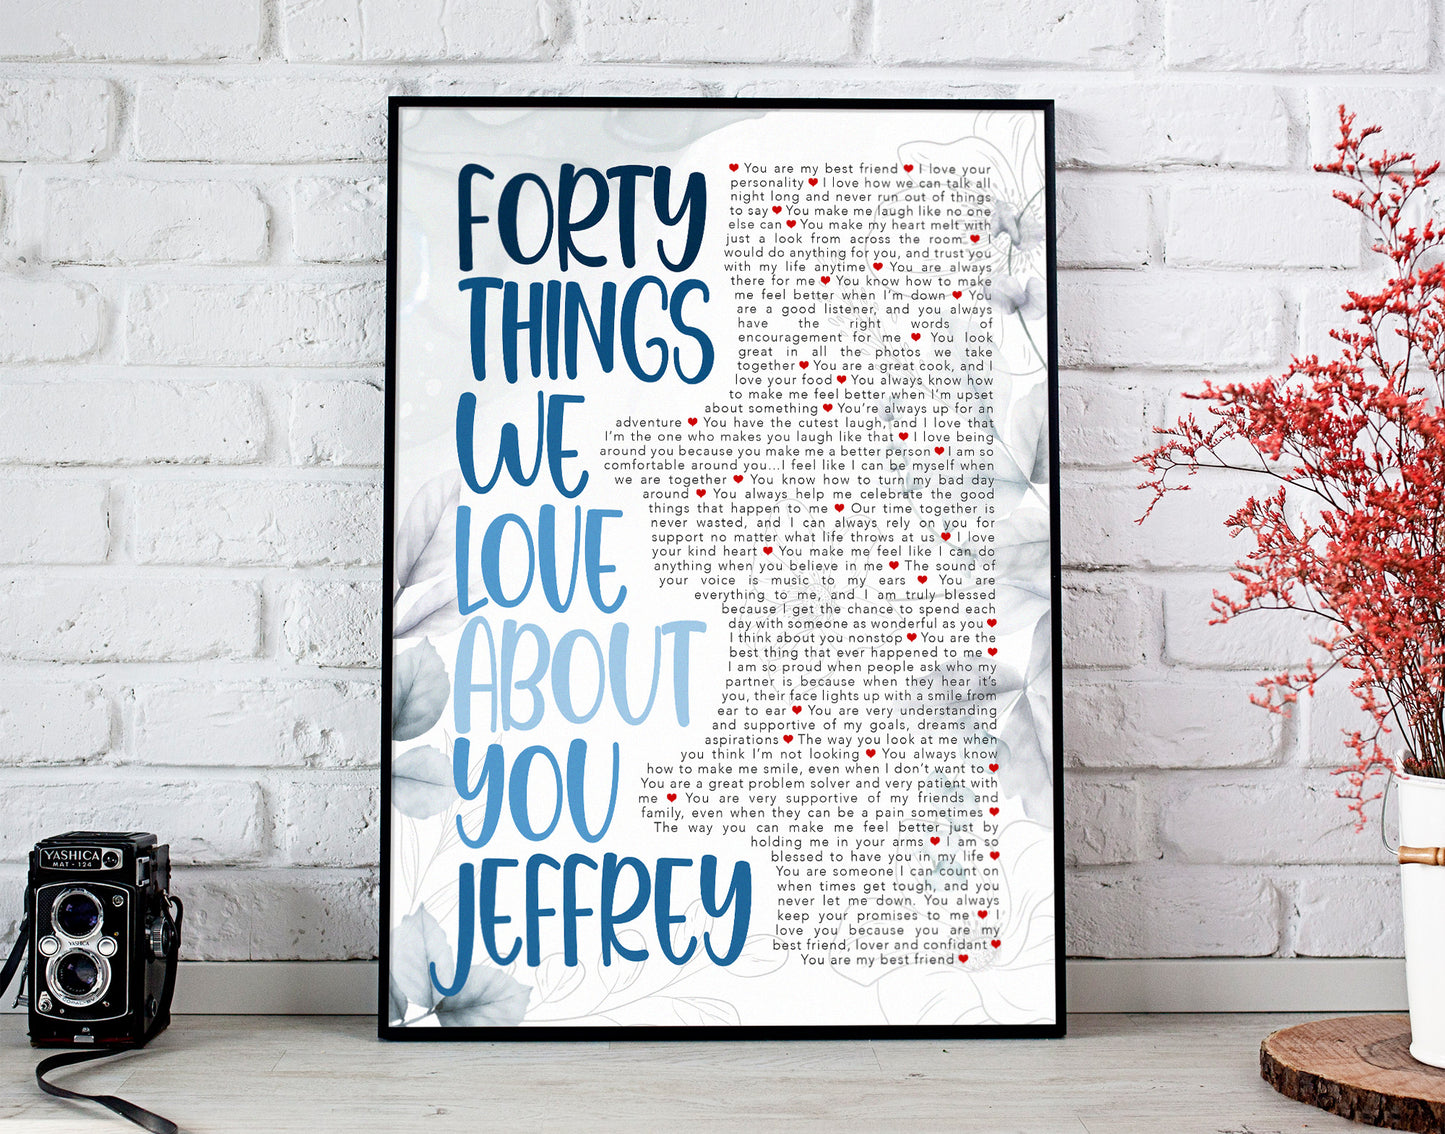 40th Birthday Gift - Forty things we love about you - Personalized Name and things text - Digital Canvas Print File